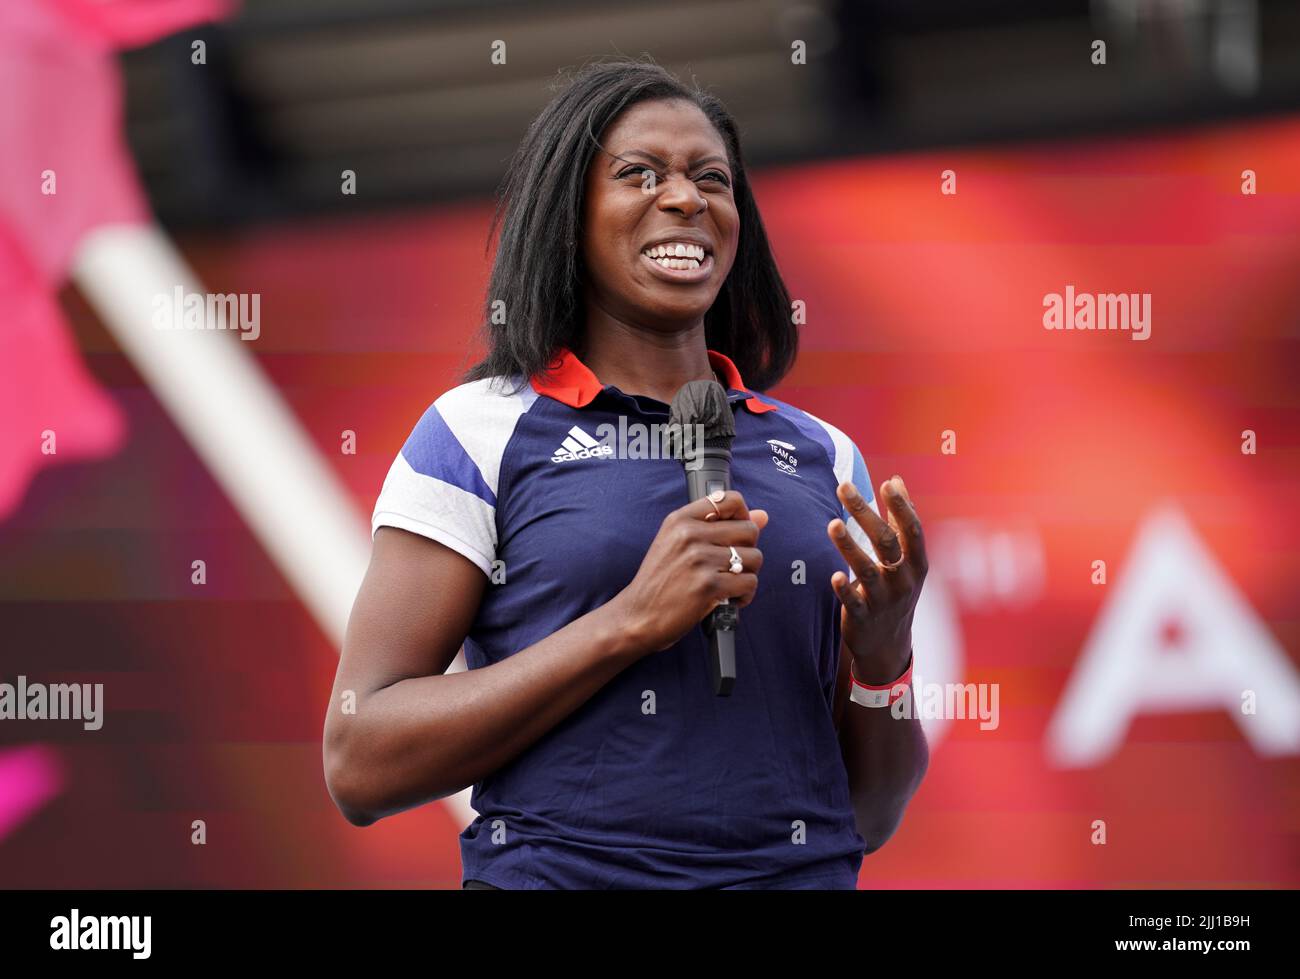 Olympic gold medallist Christine Ohuruogu during the London 2012 Olympics 10th Anniversary Event held at Bridge One at the Queen Elizabeth Olympic Park, London. Wednesday July 27 will mark exactly 10 years since the opening ceremony of the 2012 London Olympics Games. Picture date: Friday July 22, 2022. Stock Photo